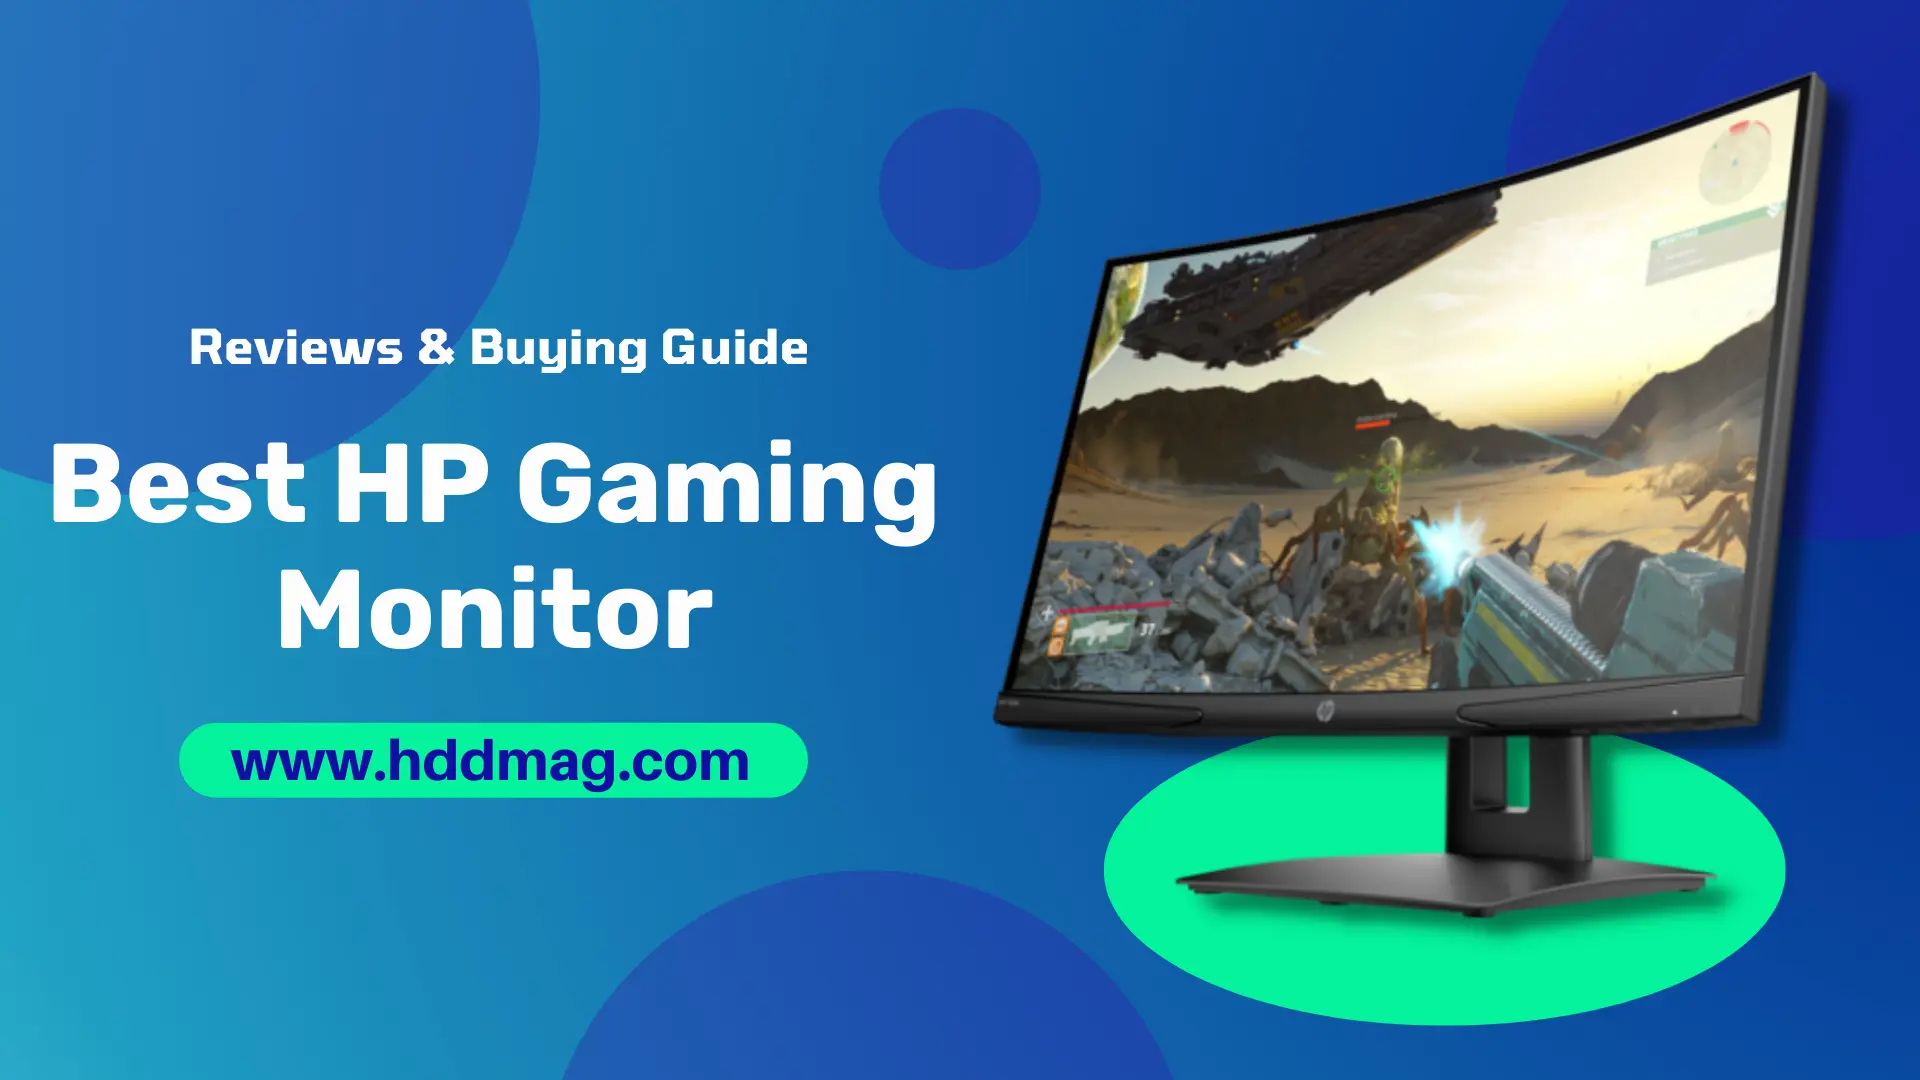 Best HP Gaming Monitor